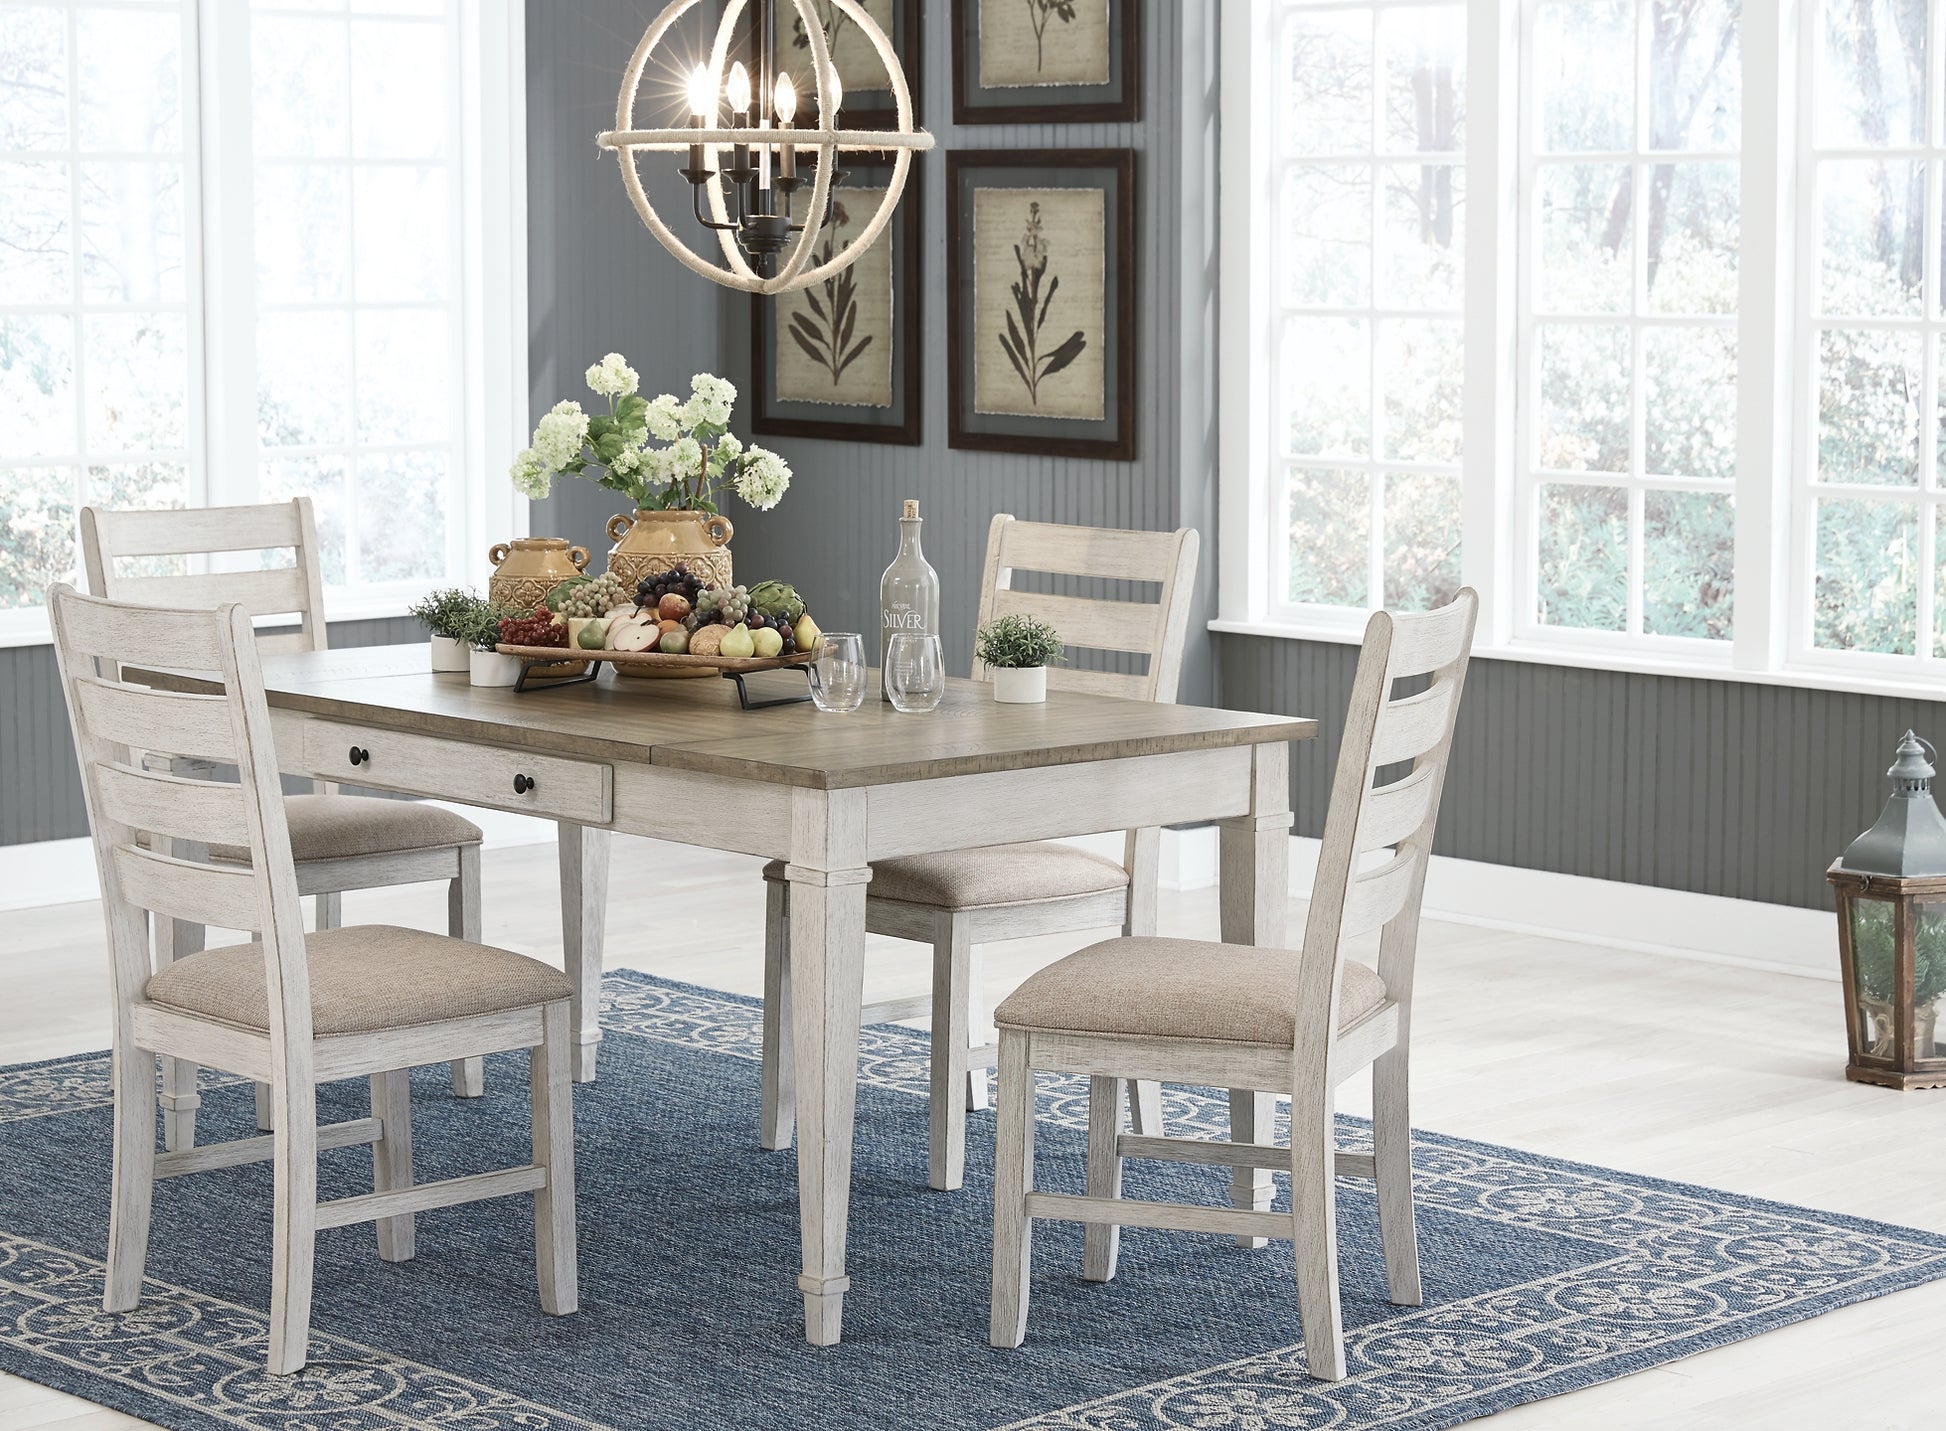 Skempton Dining Table and 4 Chairs Wilson Furniture (OH)  in Bridgeport, Ohio. Serving Bridgeport, Yorkville, Bellaire, & Avondale